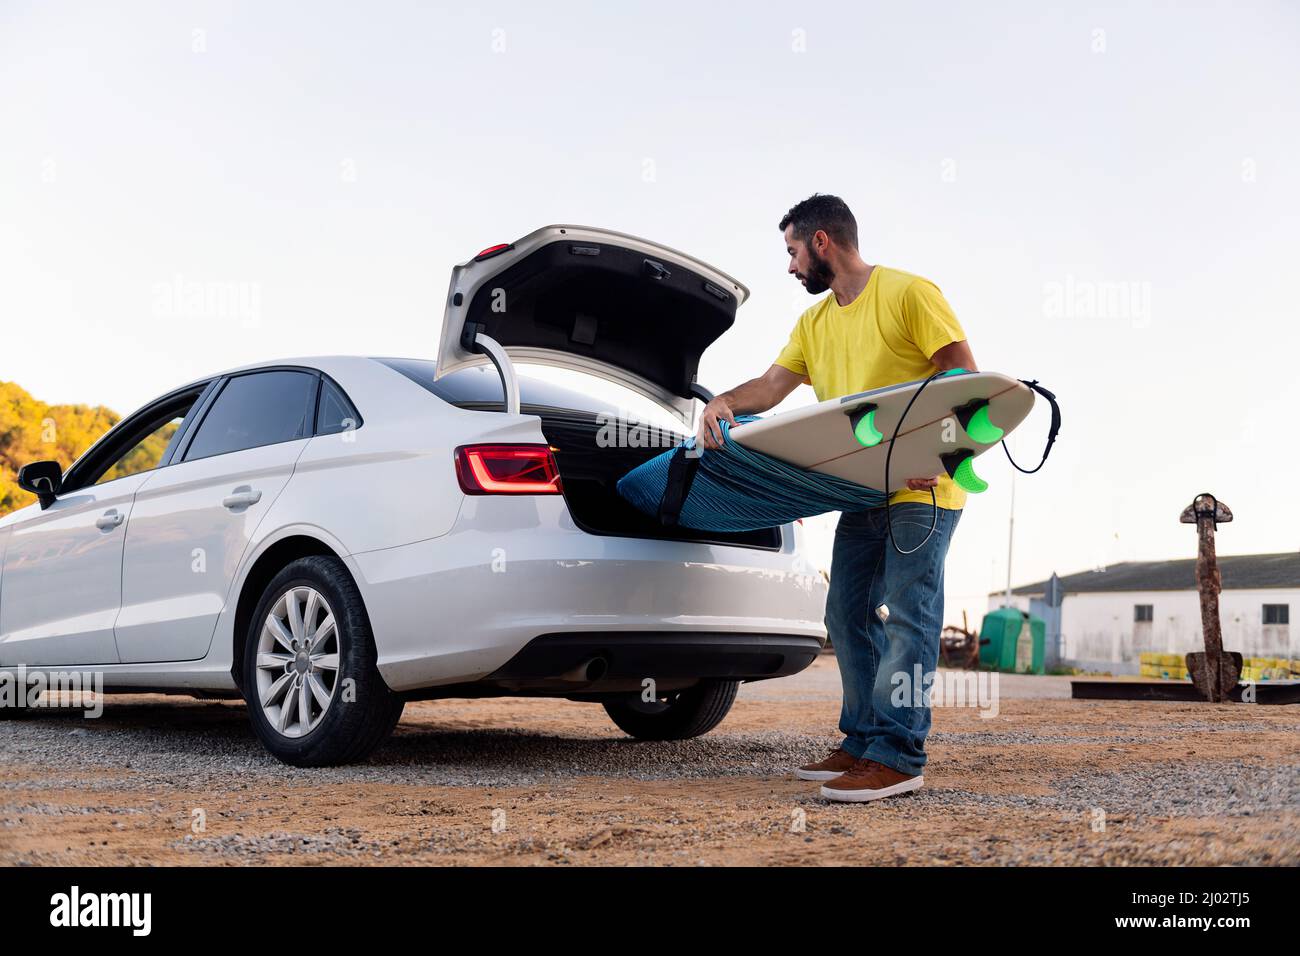 bearded young man taking his surfboard out of the trunk of the car, leisure and hobbies concept, copy space for text Stock Photo